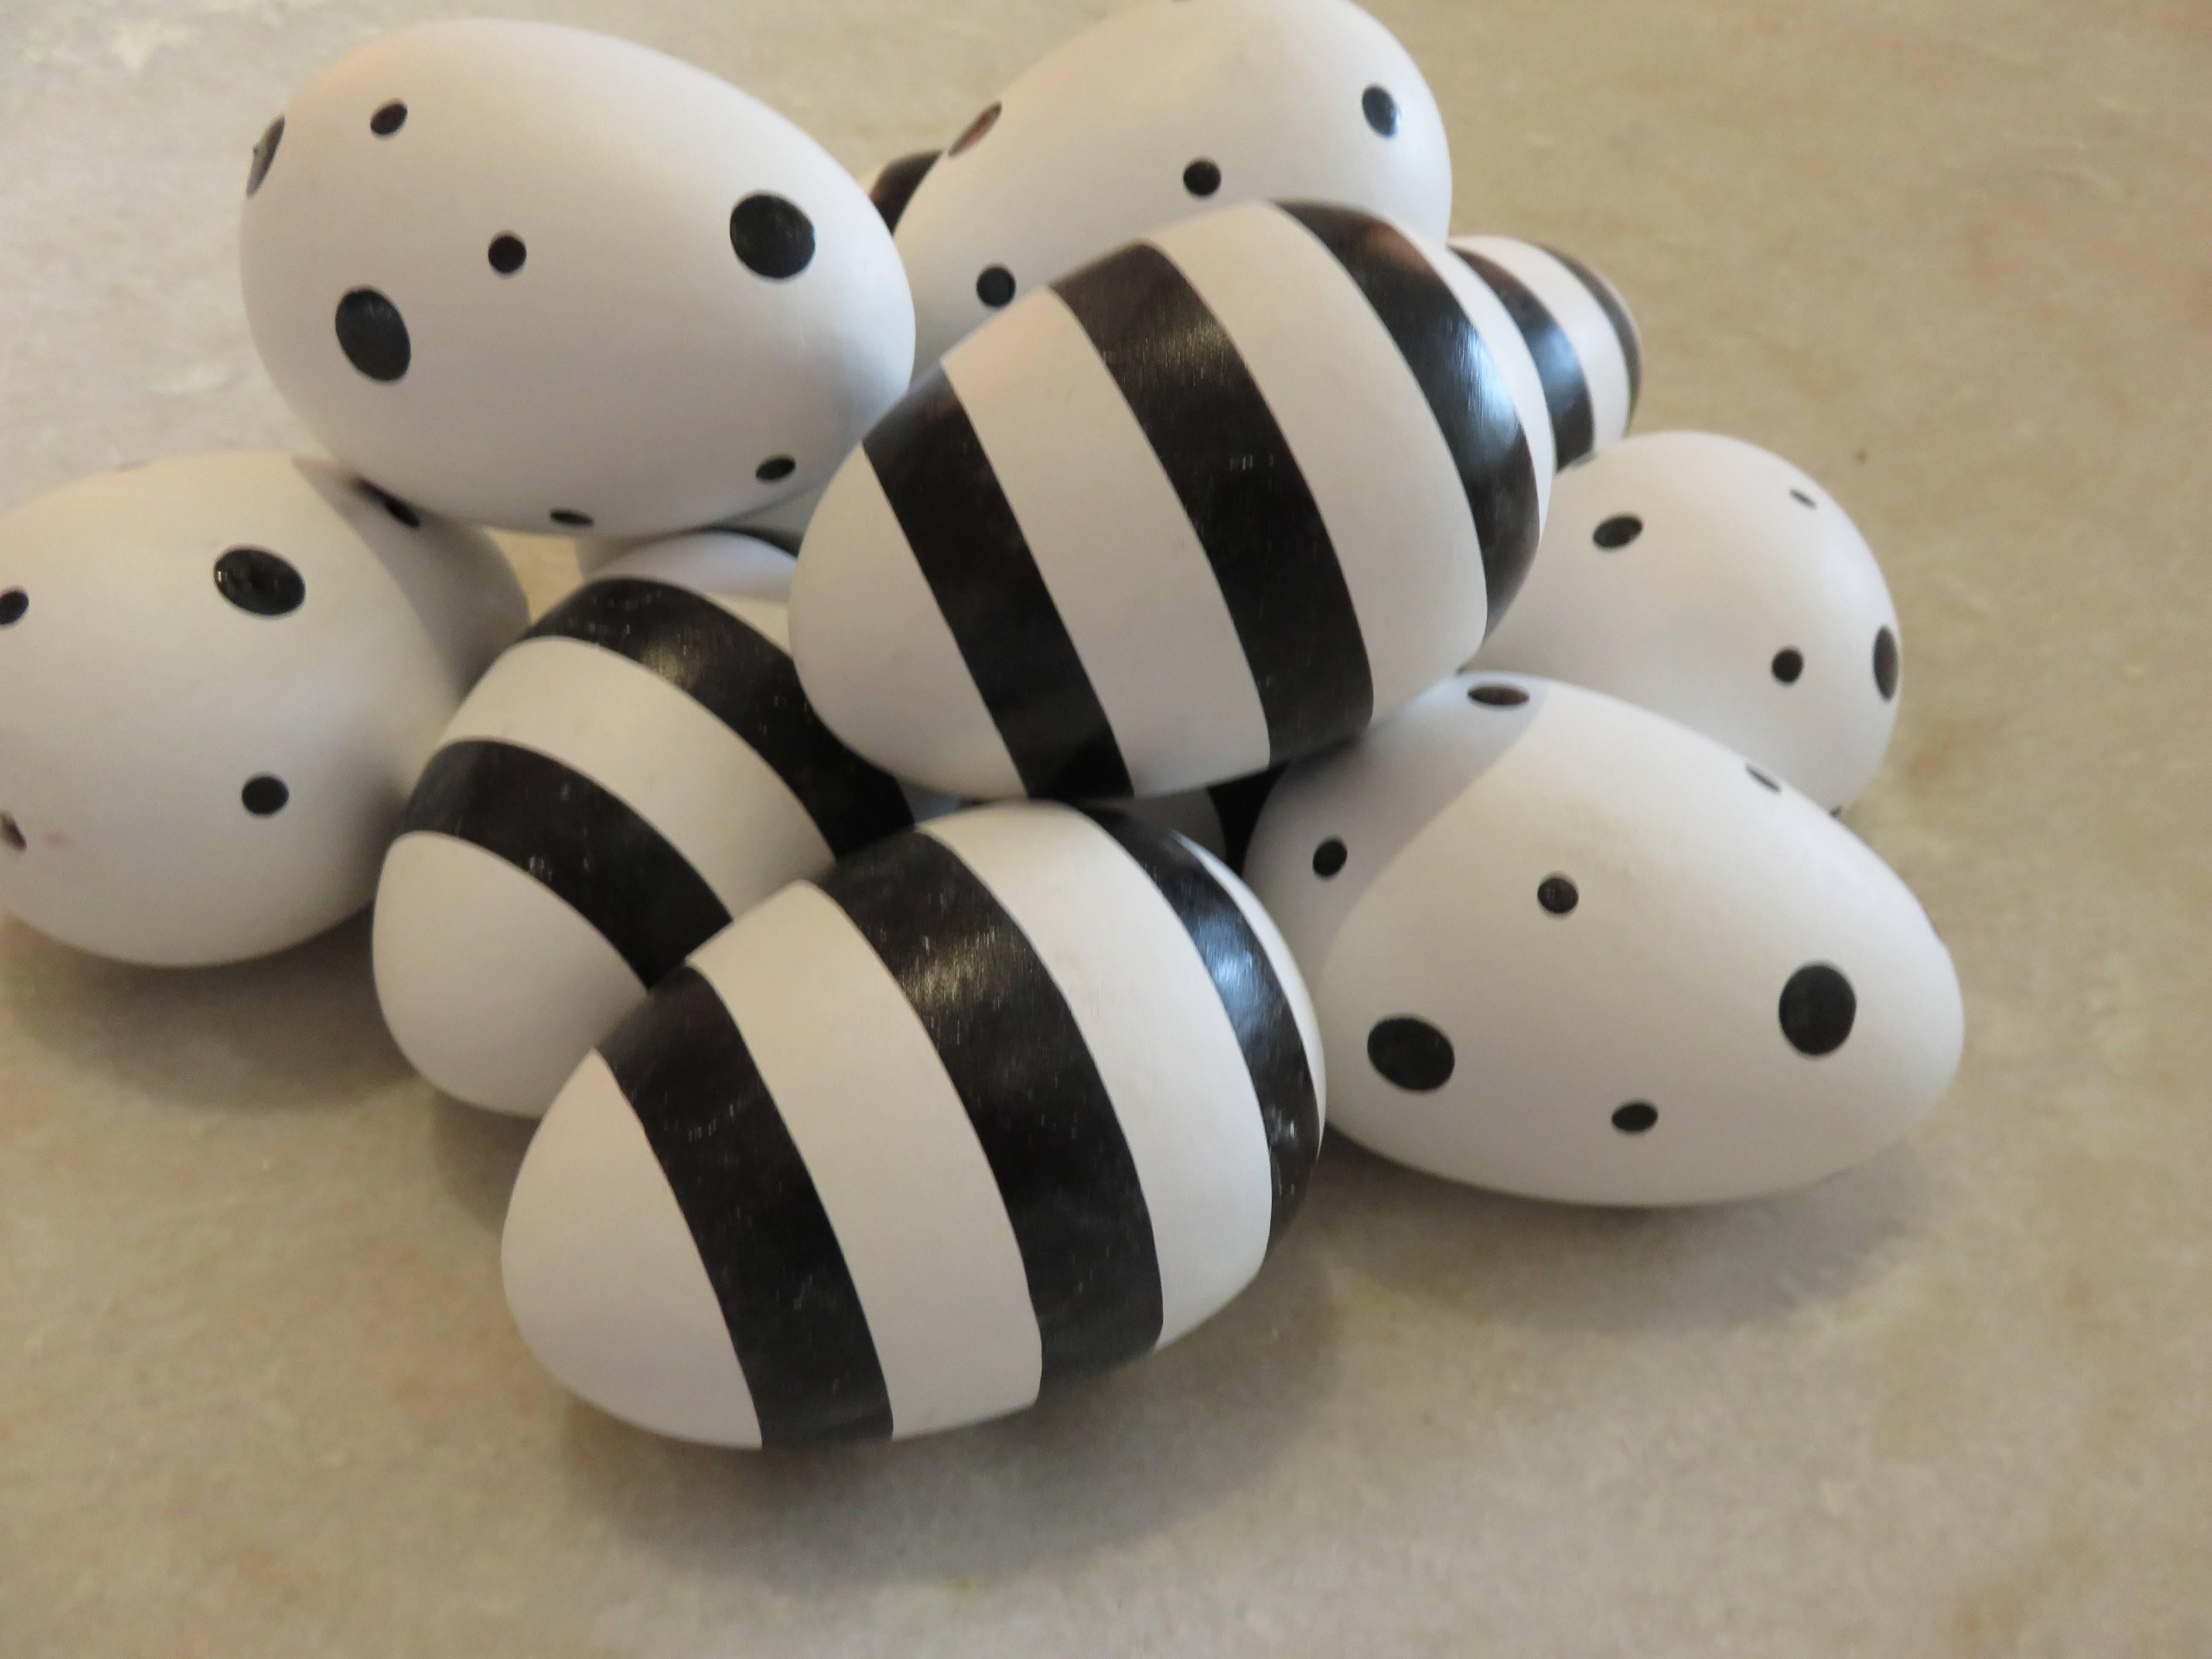 Ten handcrafted and hand-painted Geoffrey Beene ceramic eggs, dots and stripes, showroom props from the 1980s NY.